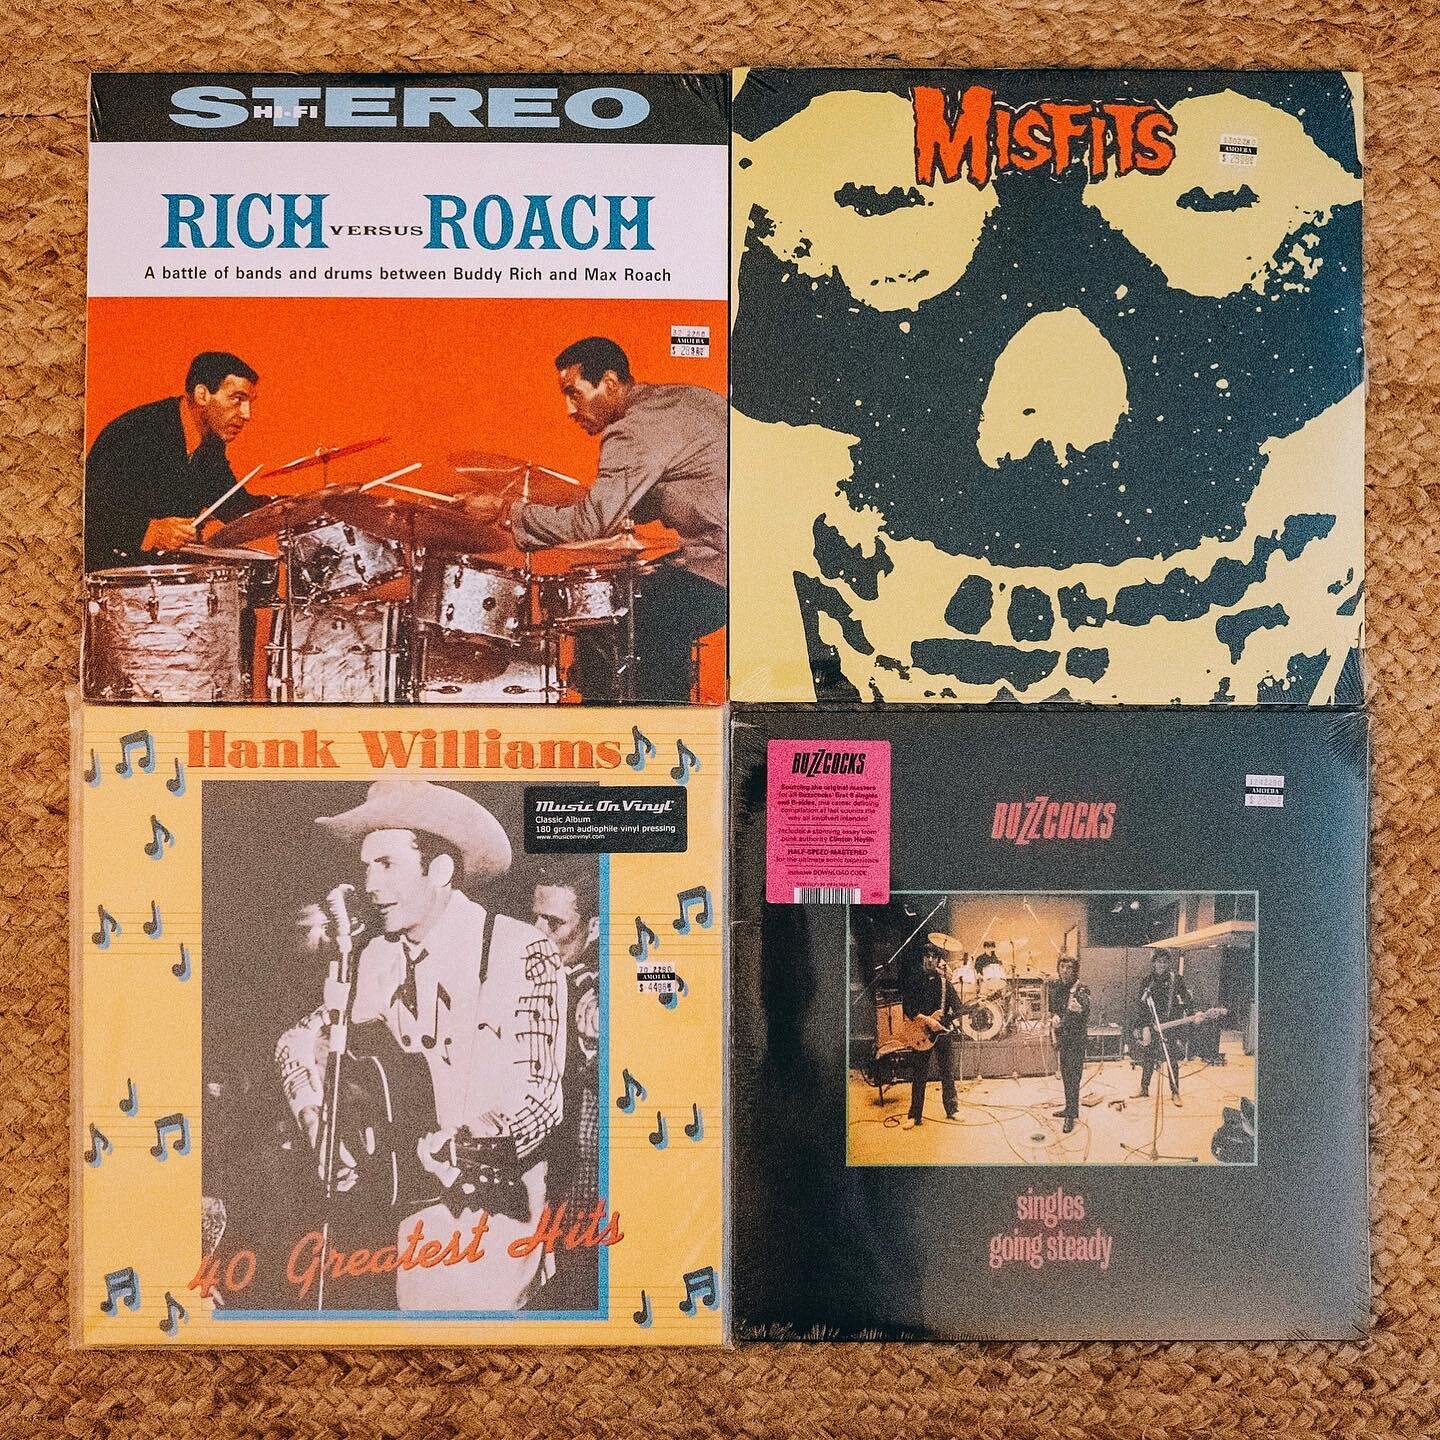 Feeling good about today's purchases

Note: 'Rich vs Roach' is an absolutely amazing album. It's my second favorite cover art, trailing only behind 'Bitches Brew'. Anything Derek Riggs fills out the top 5.

 #BirthdayGiftToMyself
 #HappyBirthdayToMe